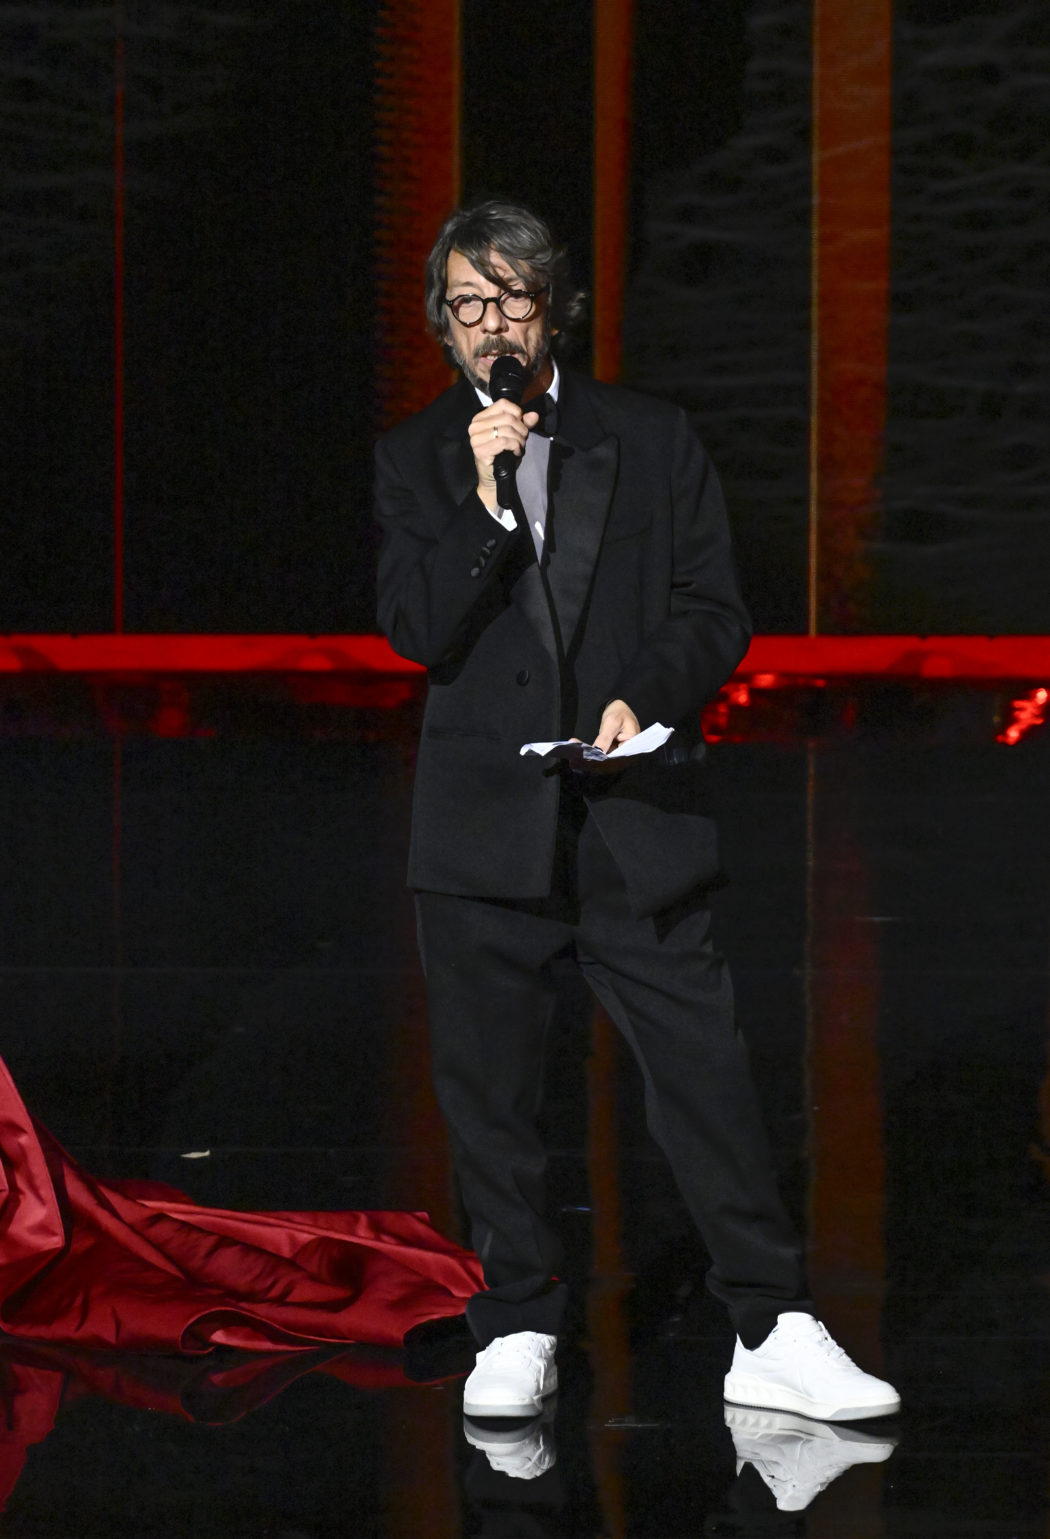 LONDON, ENGLAND – DECEMBER 05: Pierpaolo Piccioli receives the designer of the year award for Valentino on stage during The Fashion Awards 2022 at the Royal Albert Hall on December 05, 2022 in London, England. (Photo by Gareth Cattermole/BFC/Getty Images for BFC)